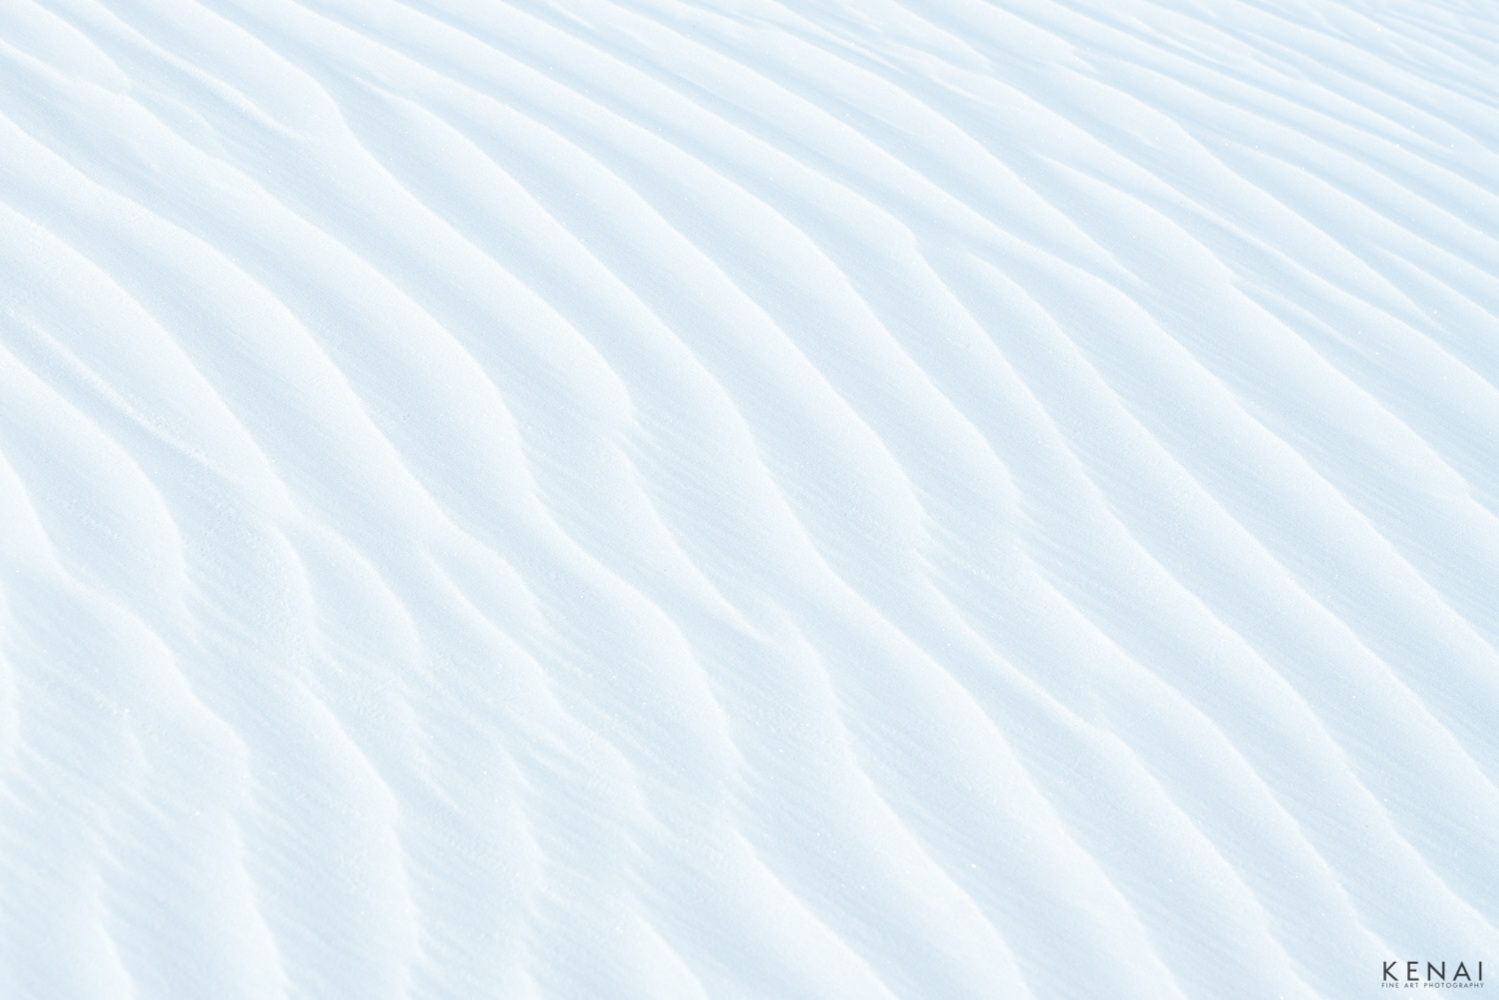 Pure white gypsum waves in this abstract image of White Sands National Park.